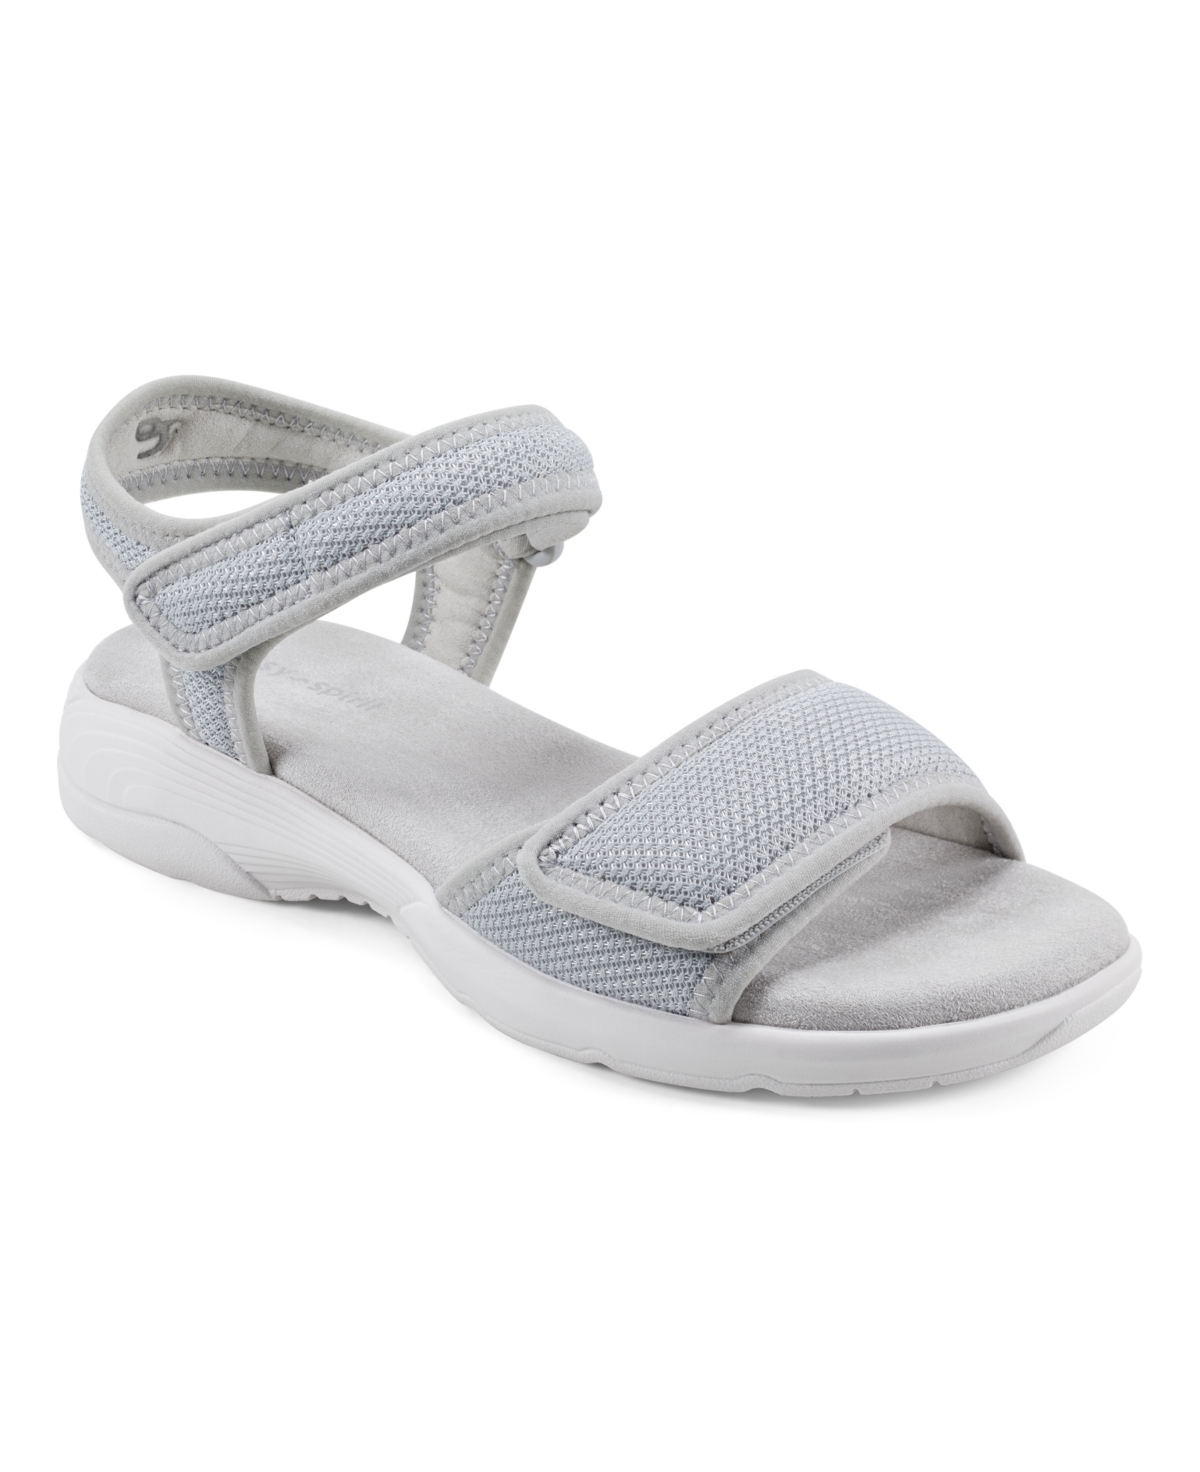 Women's Teline Round Toe Flat Casual Sandals - Taupe